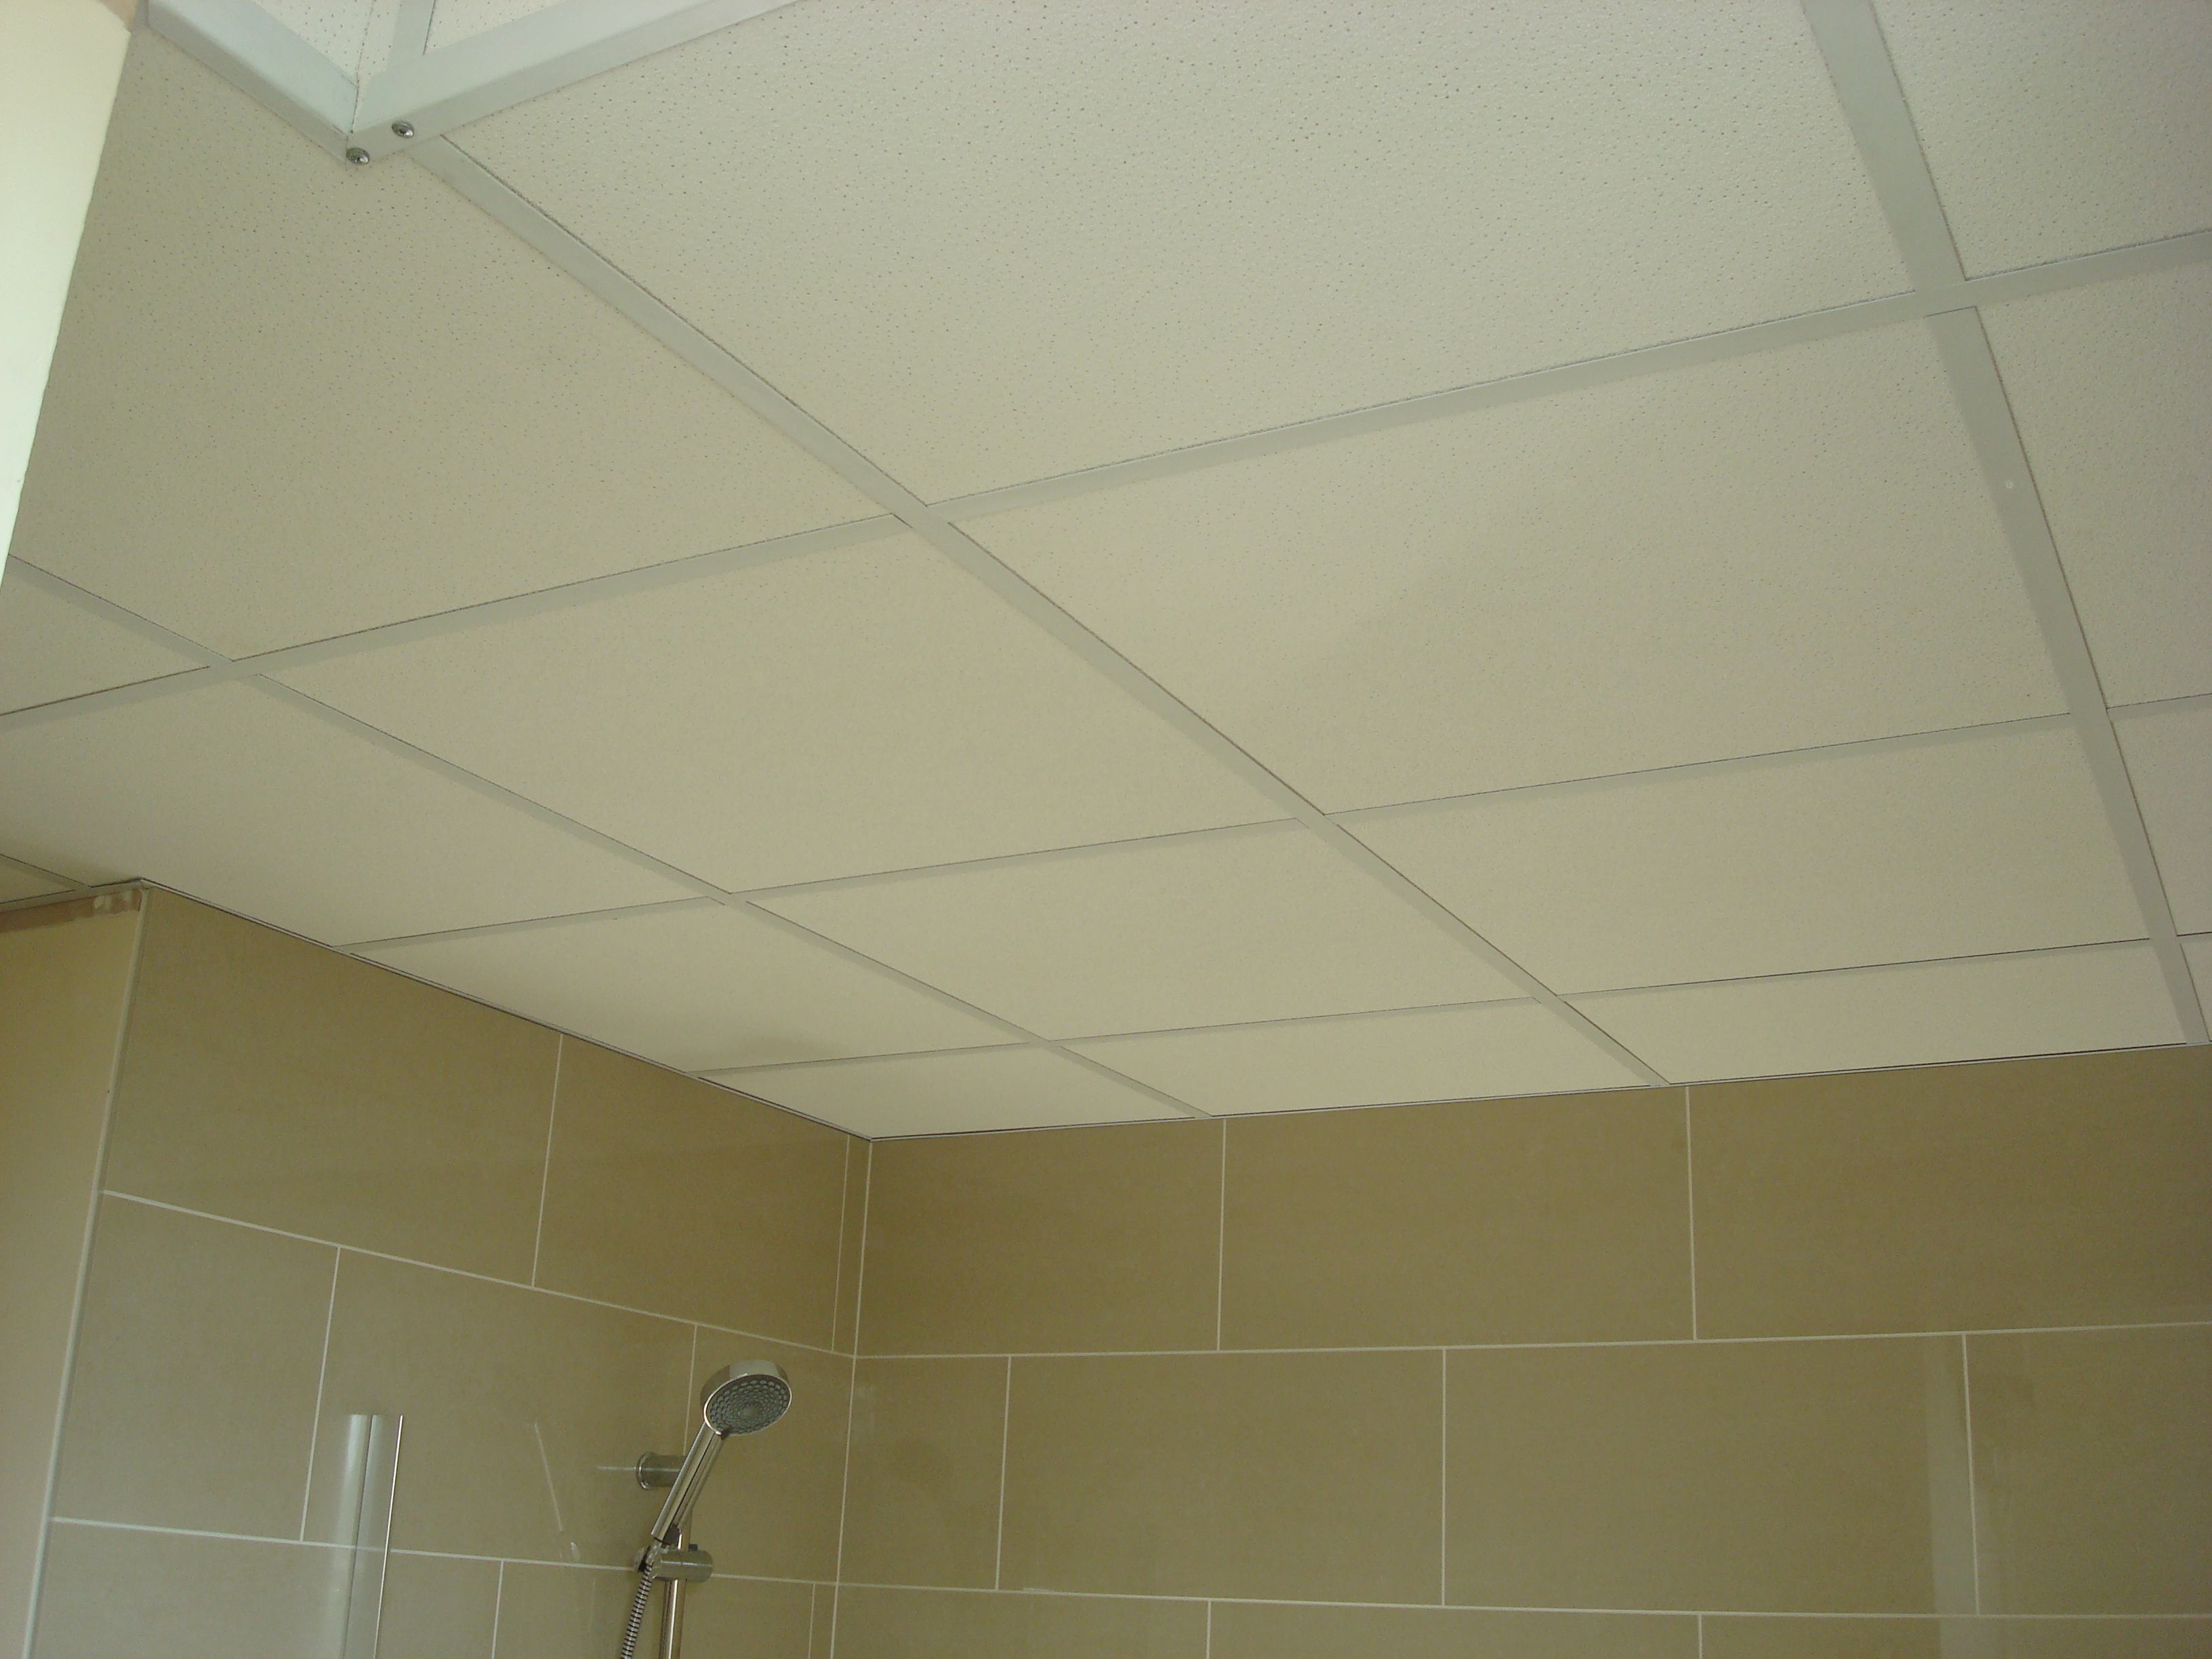 Permalink to Shower Suspended Ceiling Tiles